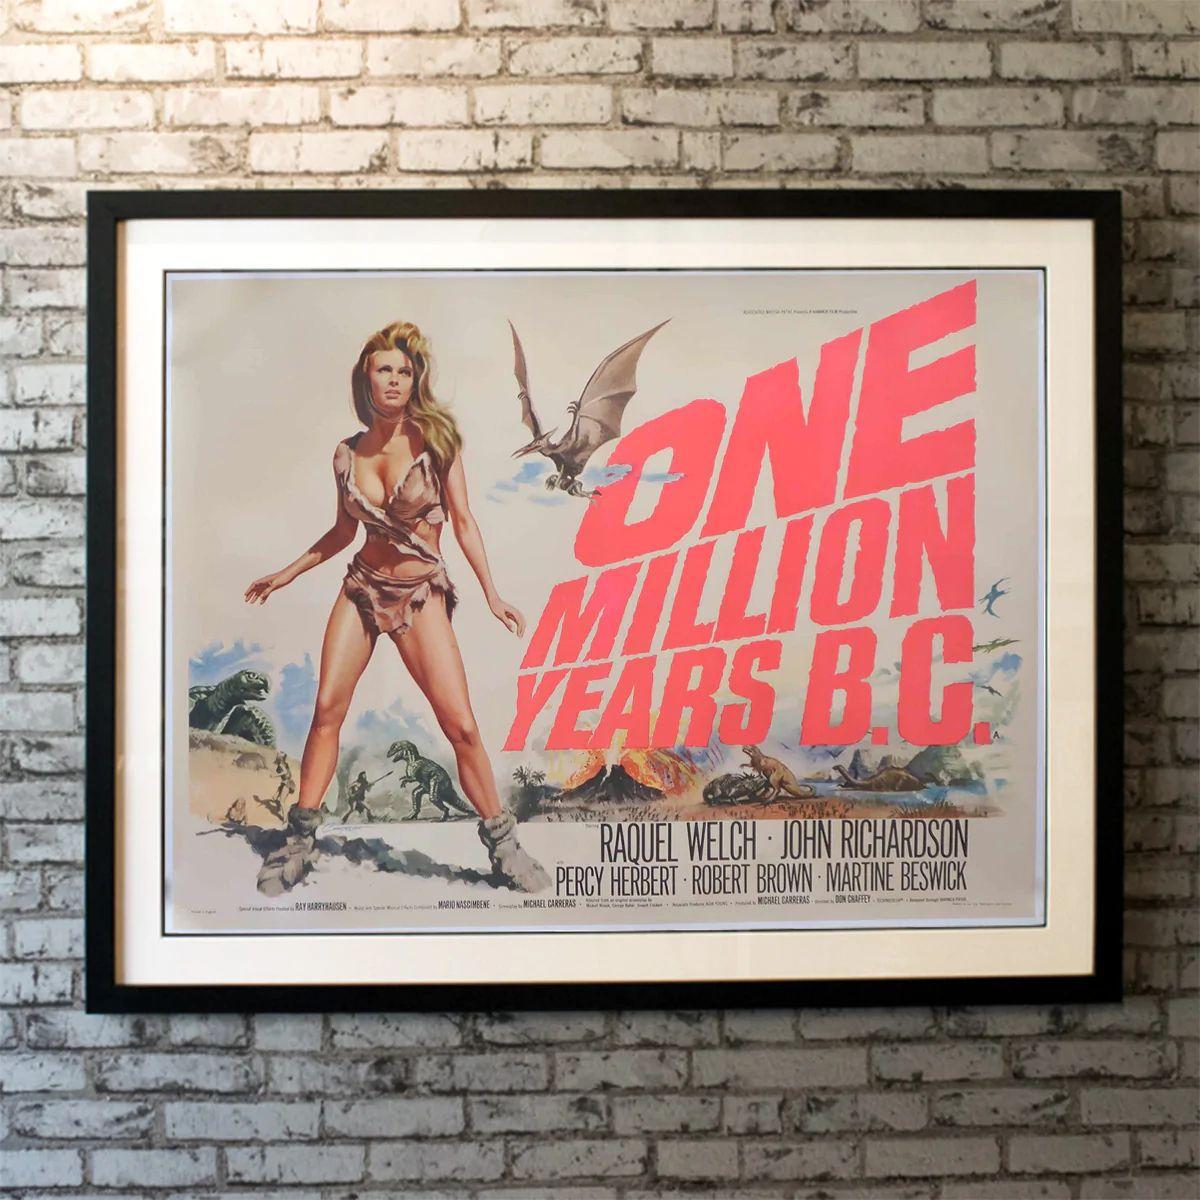 One Million Years B.C., Unframed Poster, 1966

Original British Quad (30 X 40 Inches). Prehistoric man Tumak is banished from his savage tribe and meets pretty Loana, who belongs to a gentler coastal tribe but he must fight caveman Payto to win